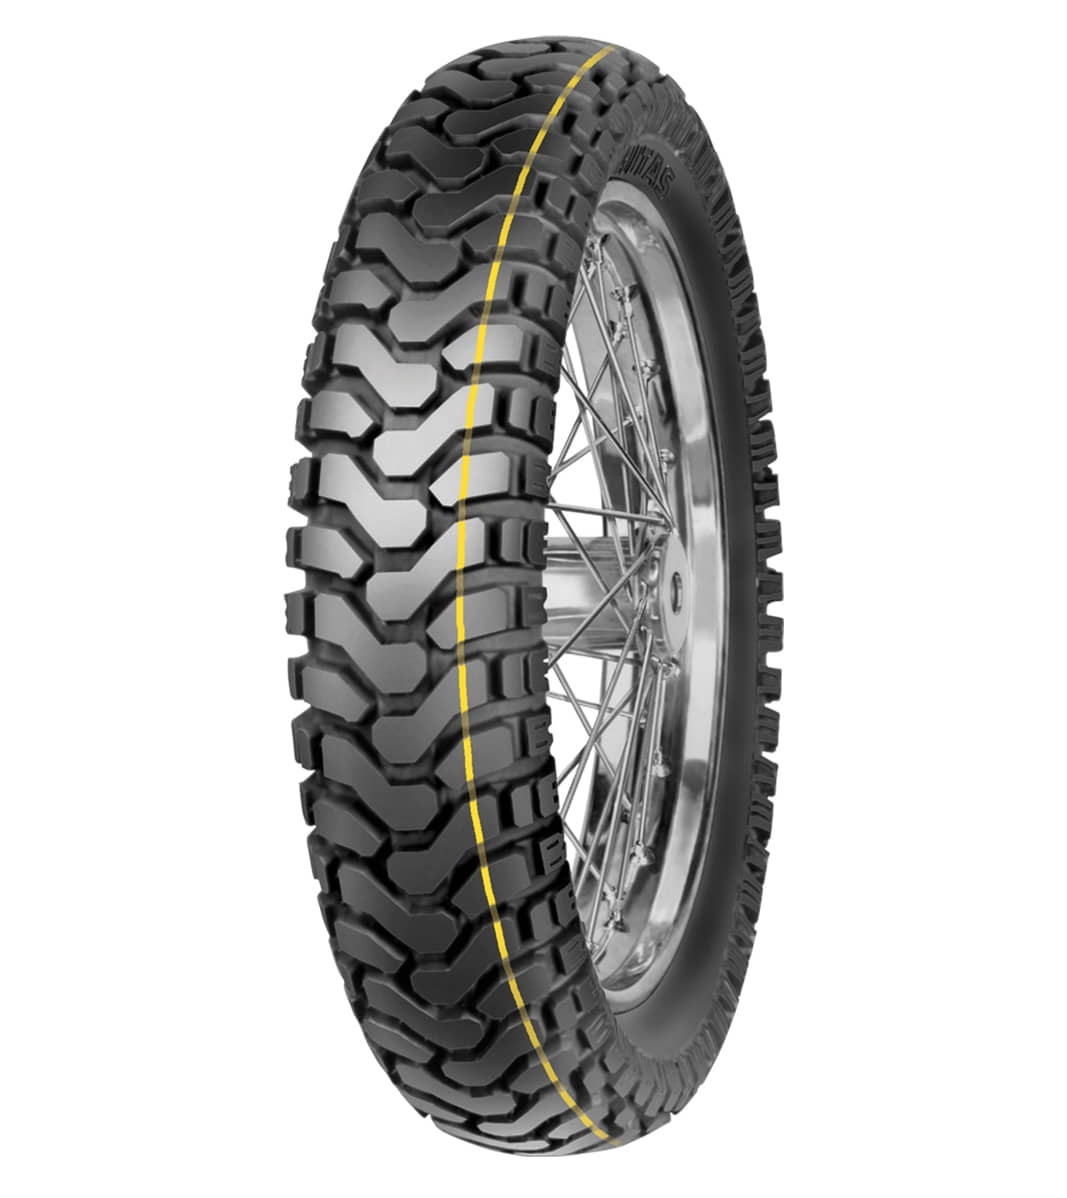 Mitas E-07 ENDURO 140/80-18 Trail OFF Trail DAKAR 70T Yellow Tubeless Rear Tire, 224429, 140/80-18, Adventure Touring, E Series, E-07 Enduro, Rear, Trail, Trail OFF, Tires - Imported and distributed in North & South America by Lindeco Genuine Powersports - Premier Powersports Equipment and Accessories for Motorcycle Enthusiasts, Professional Riders and Dealers.